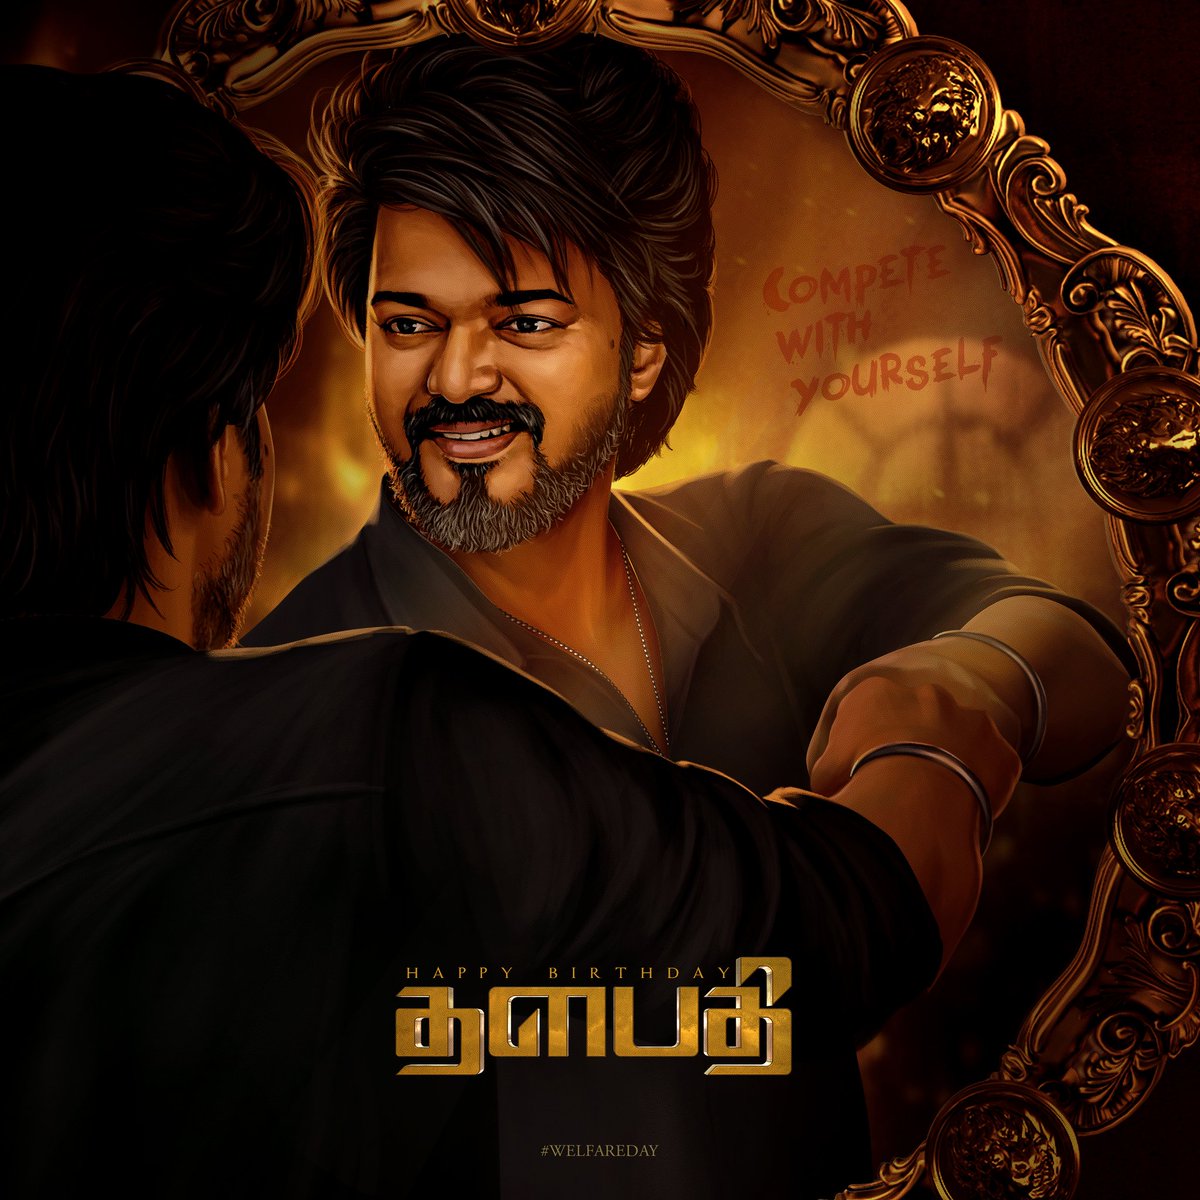 Here we go! The Common DP to Celebrate our dearest Thalapathy @actorvijay's 49th Birthday ❤️ Design by @Santhoshtoans #ThalapathyVIJAYBdayCDP #Leo @actorvijay